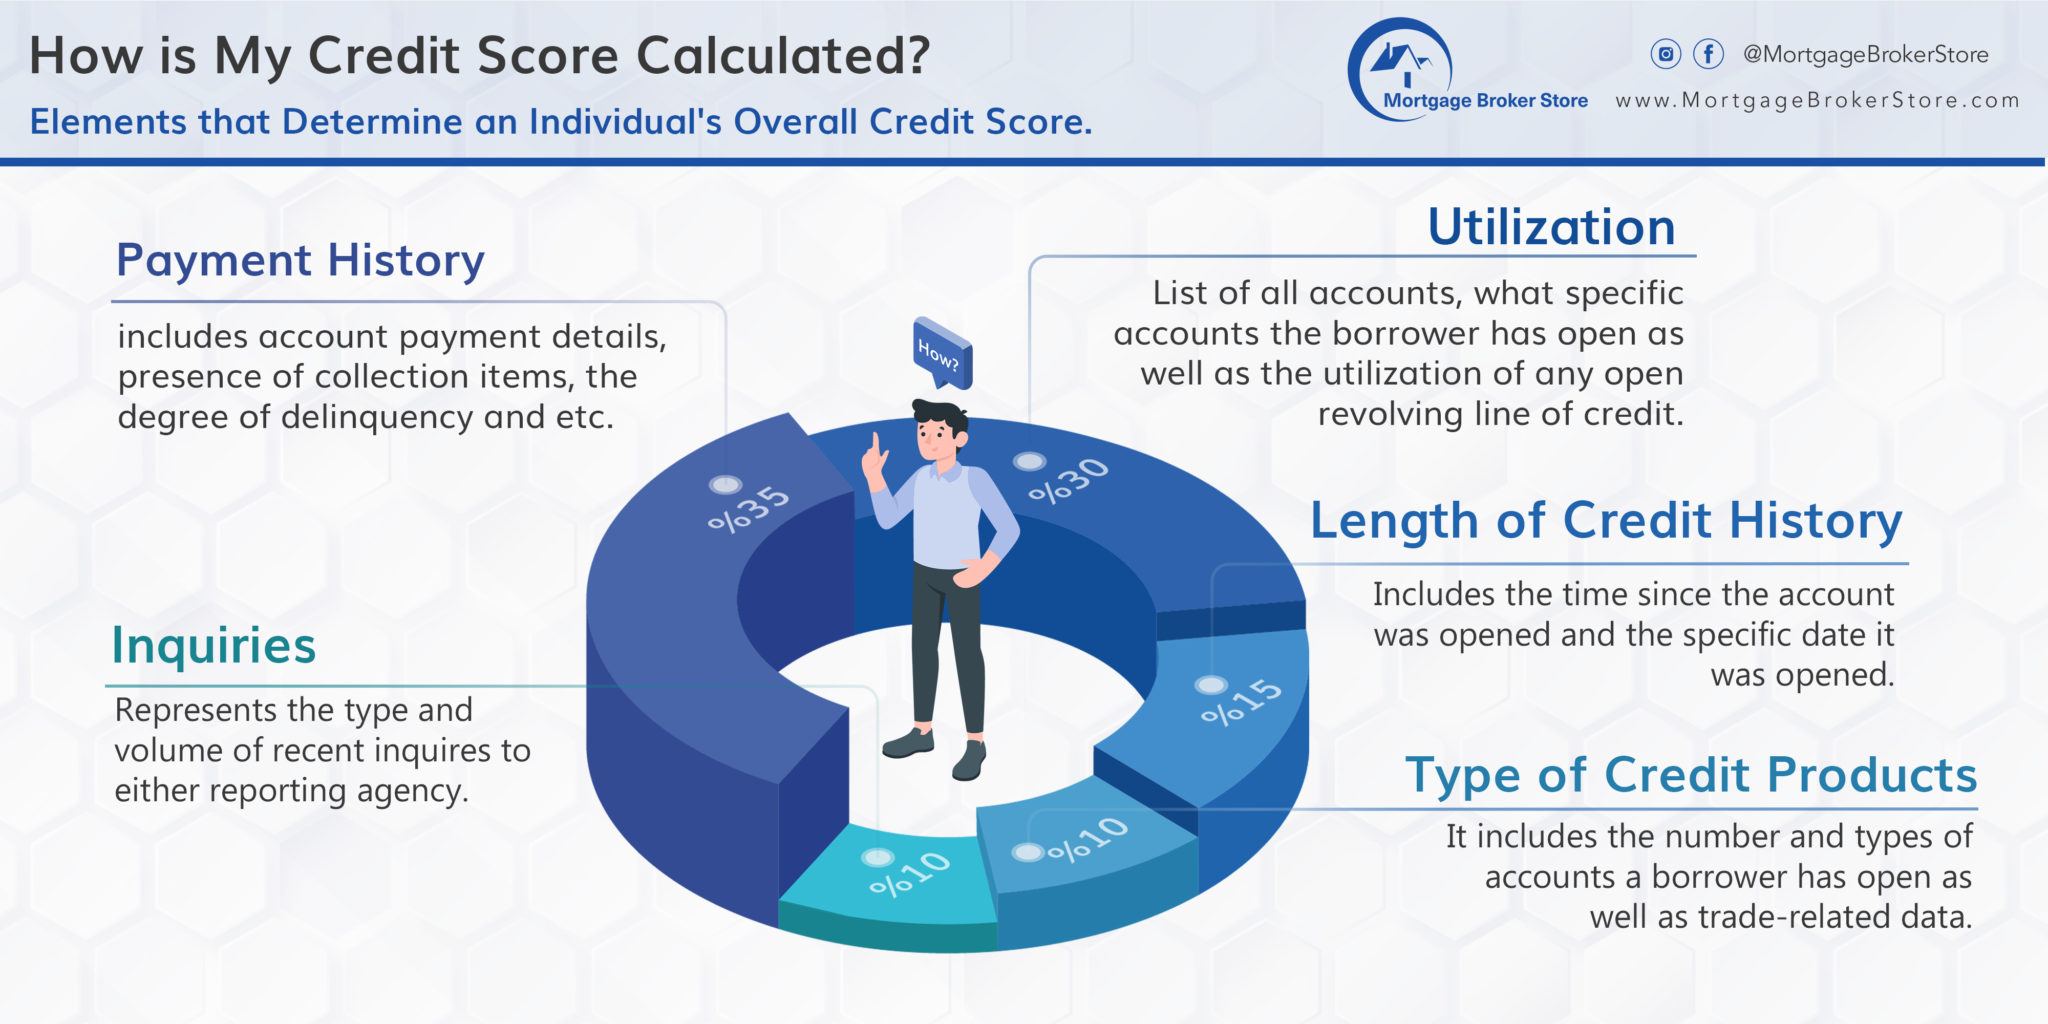 How is My Credit Score Calculated?